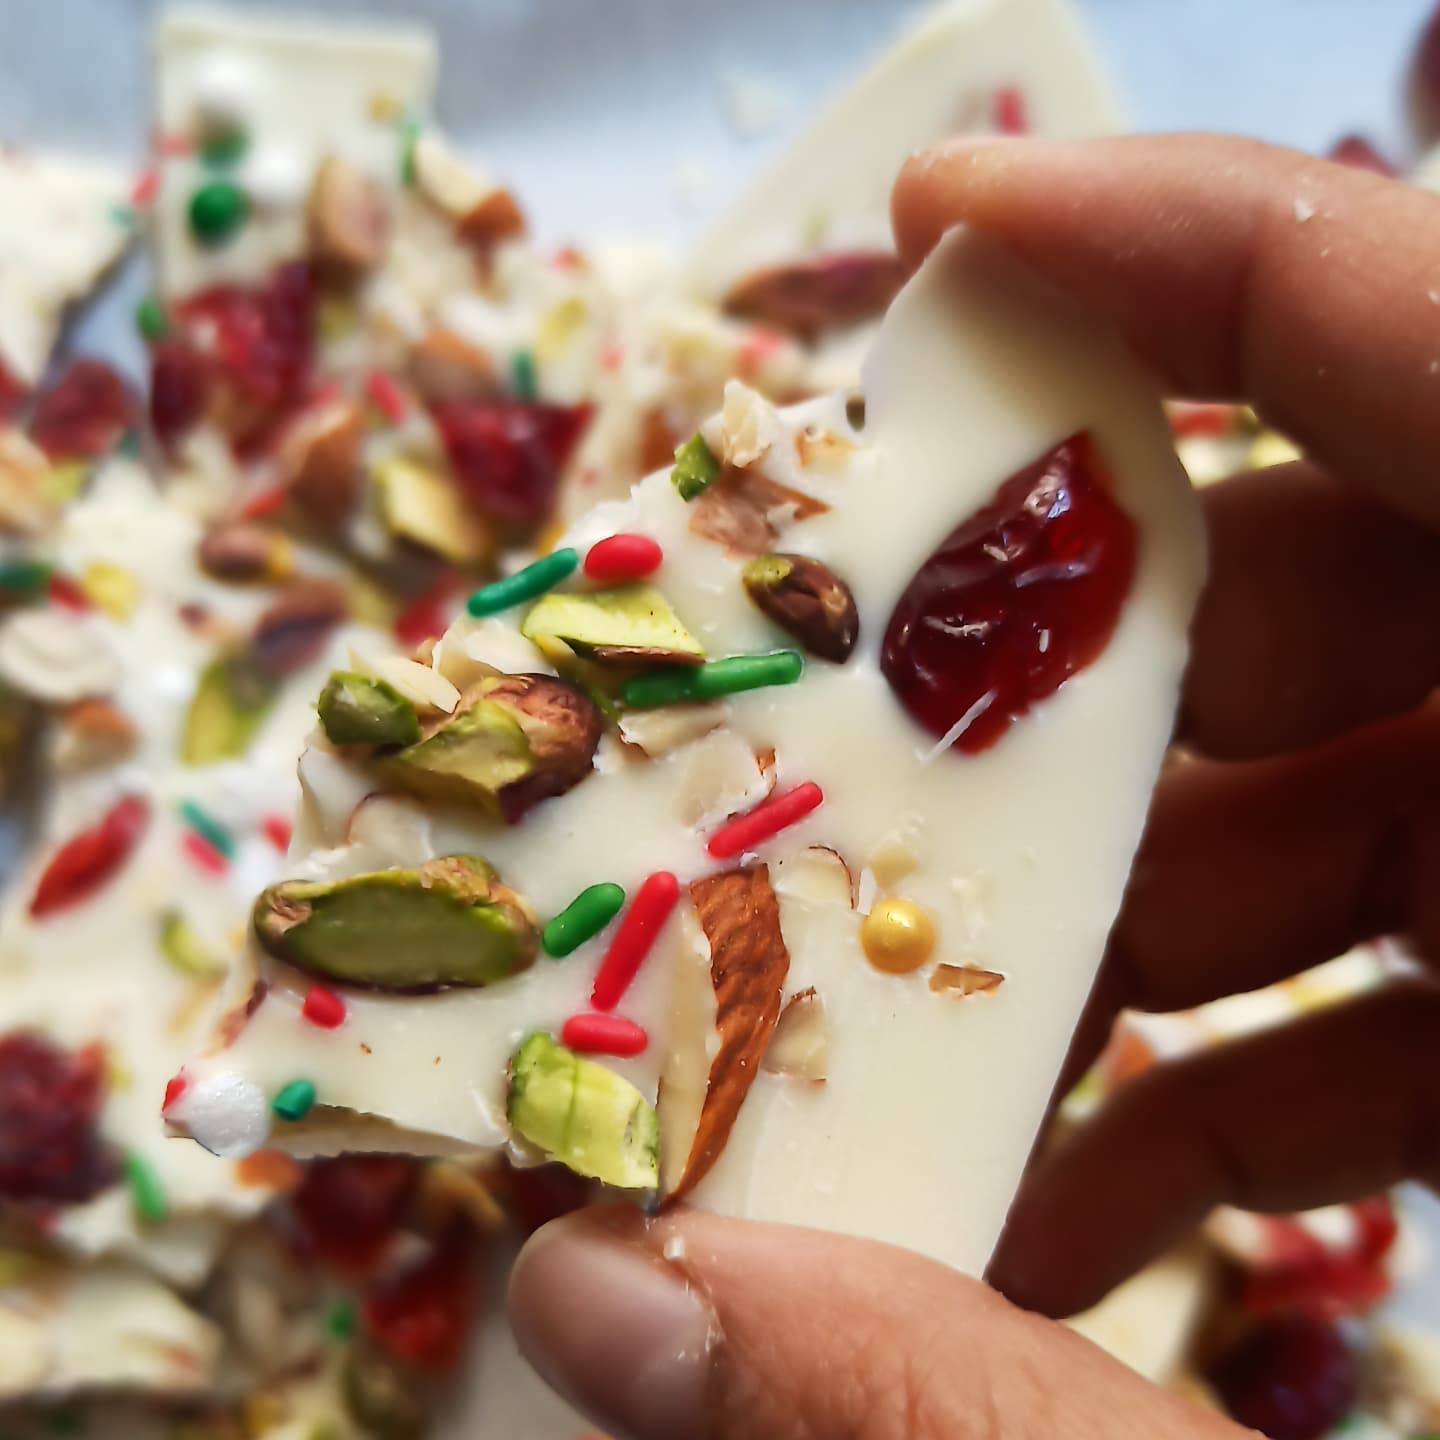 Two Ingredient Christmas Bark: It really doesn't get easier than this. This chocolate bark is Christmassy in every way. 

You'll need 
300 gms, white chocolate, melted
1 cup chopped dry fruits ( I've used pistachios, almonds, cranberries, walnuts and a dash of sprinkles. 

To make the chocolate bark, pour the melted chocolate over a tray lined with baking paper. Spread into a thin layer using a spatula. Sprinkle the chopped dry fruits all over. Leave to set in the fridge. Break into smaller pieces, once set. 

Follow@bakingwithrona for more festive treats. 

www.bakingwithrona.com

#bakingwithrona #christmasiscoming
#christmasgoodies #christmastreats #easytreats #easychristmas #easysweets #2ingredients #mostwonderfultimeoftheyear #favouritetimeofyear #foodvideos #howto #sweets #treats